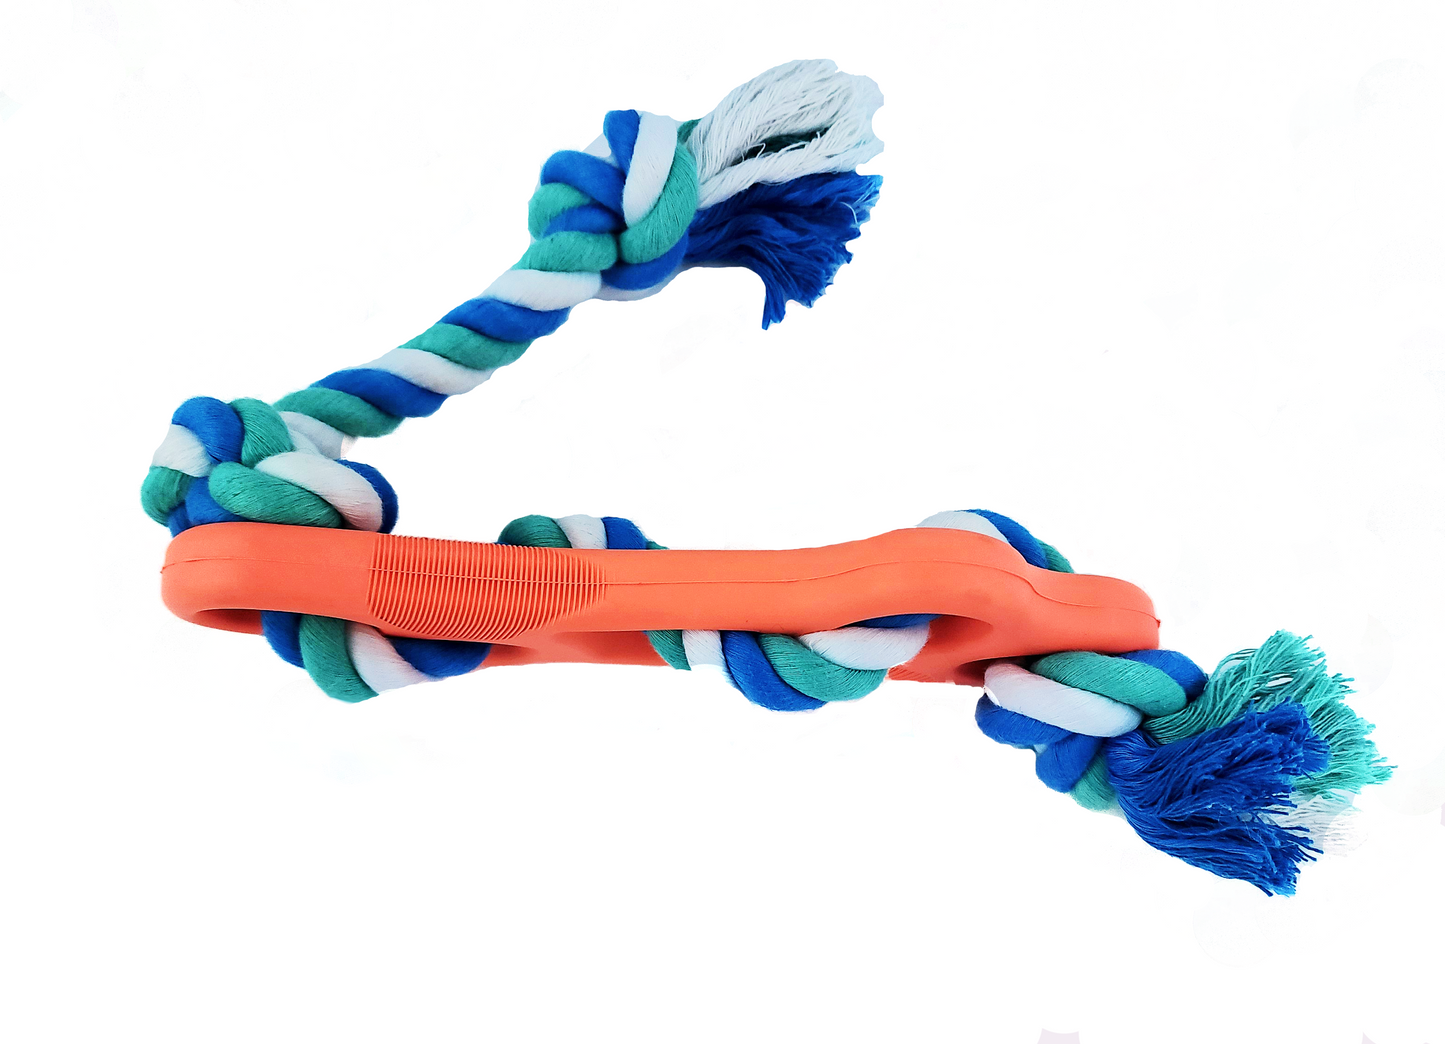 Rubber Bone Dog Chew Toy with Tug Rope - Great for Active Dogs